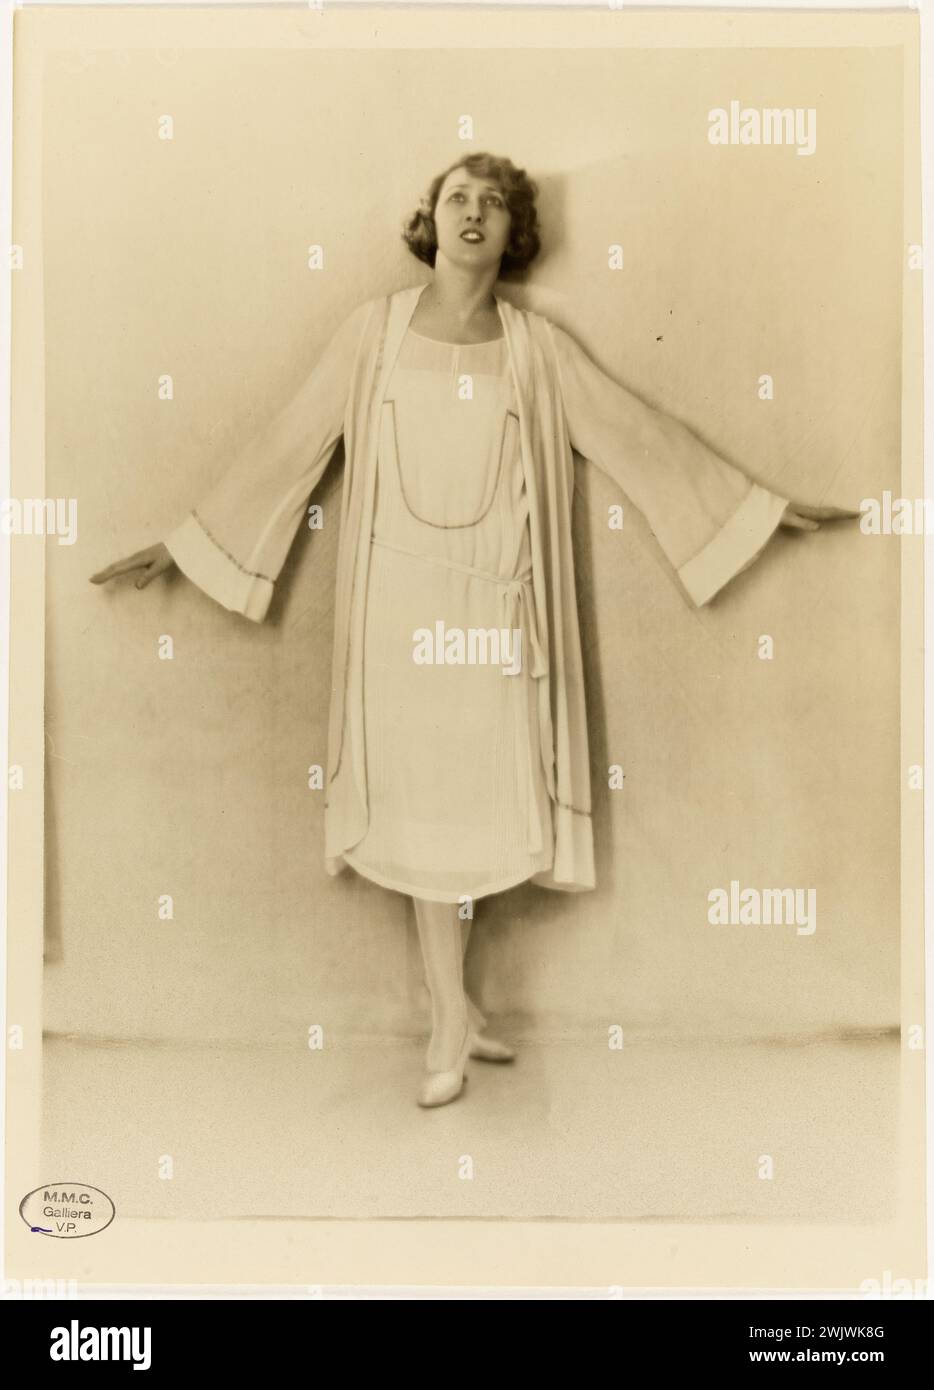 Marguerite Valmont. Disability by Jeanne Lanvin, around 1920-1925. Photograph by Studio G. L. Manuel Frères (1913-1939 - 47, rue Dumont d'Urville, Paris). Gelatino-argentic draw. Galliera, fashion museum of the city of Paris. Actress, French actress, crazy years, year vongt 1920 20, Comedienne, Comedienne francaise, femme, female mode, clothing, 20th XX 20th 20th 20th 20 Center Stock Photo